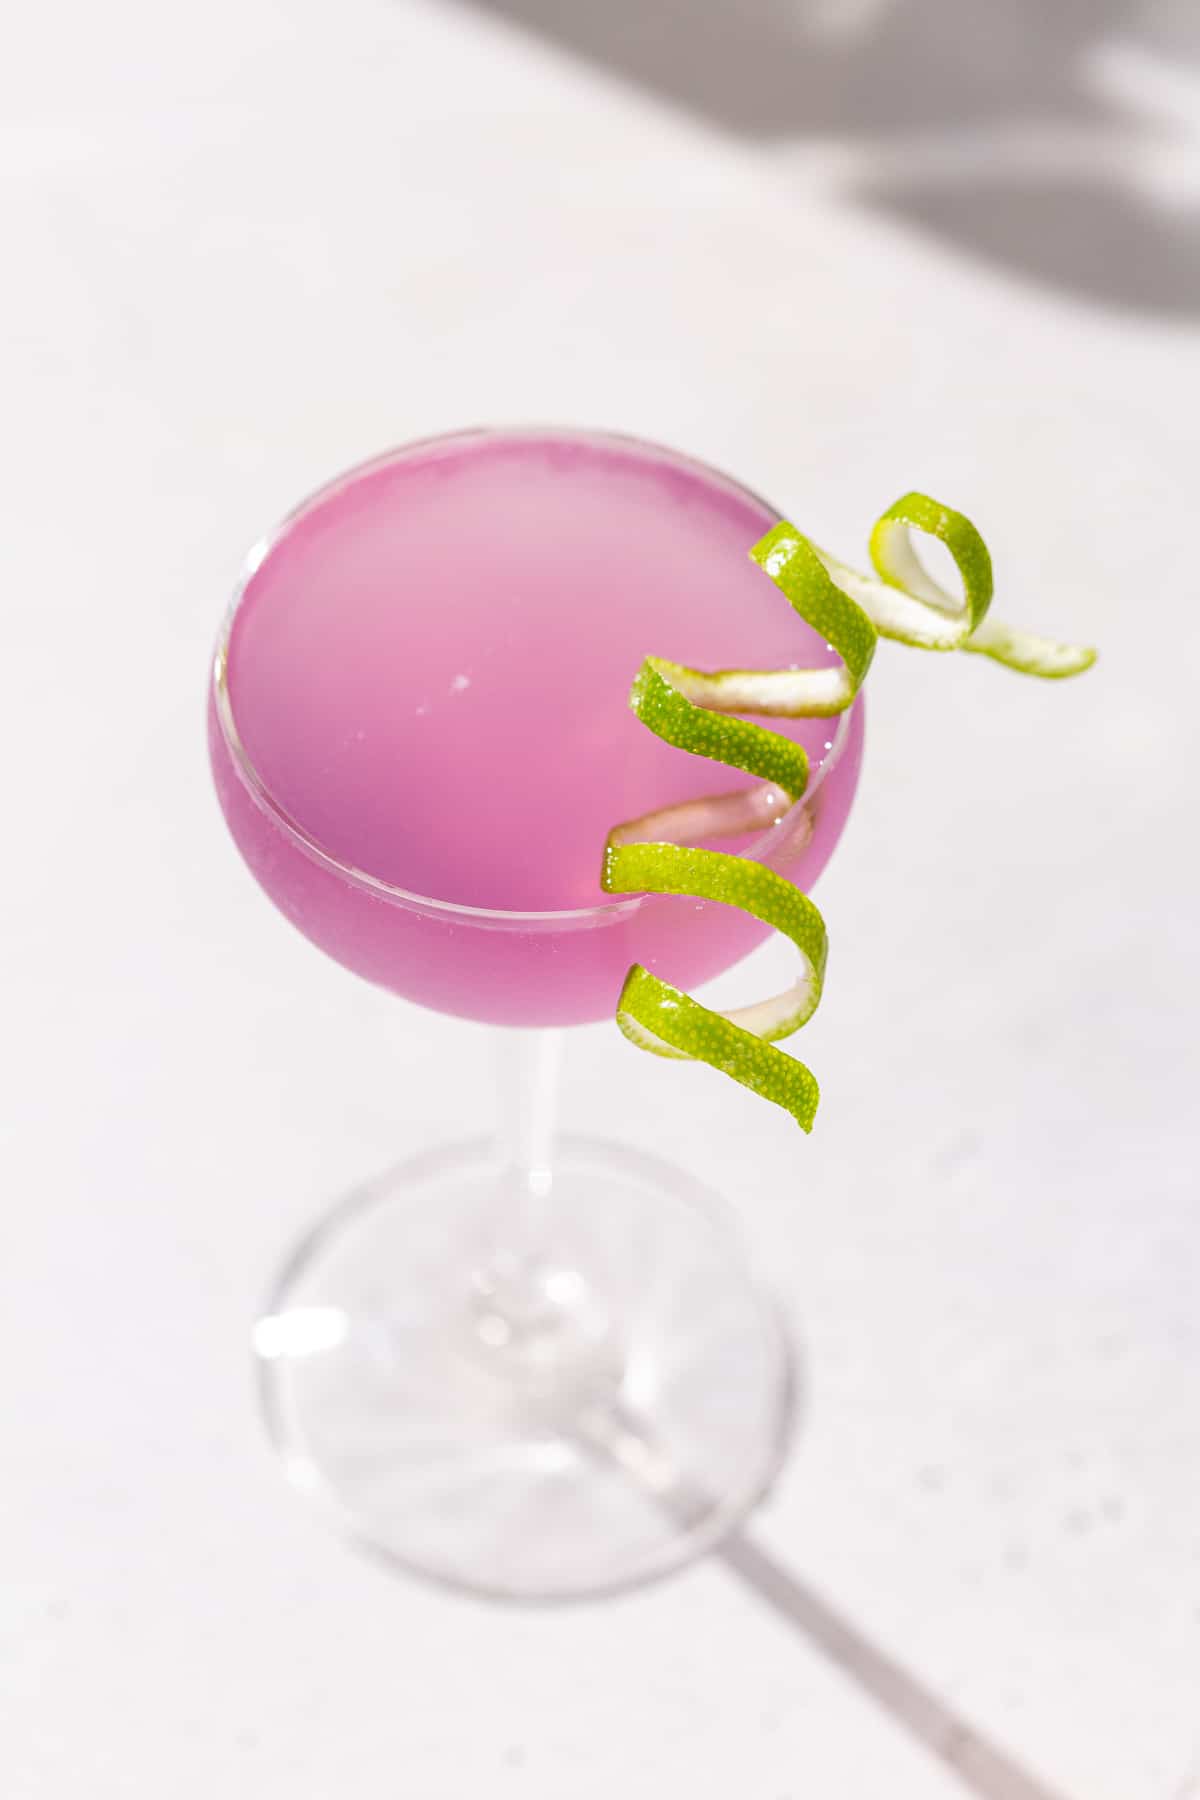 Overhead view of a French Gimlet cocktail on a countertop in a stemmed cocktail glass with a long curly lime peel garnish. The drink is purple in color.